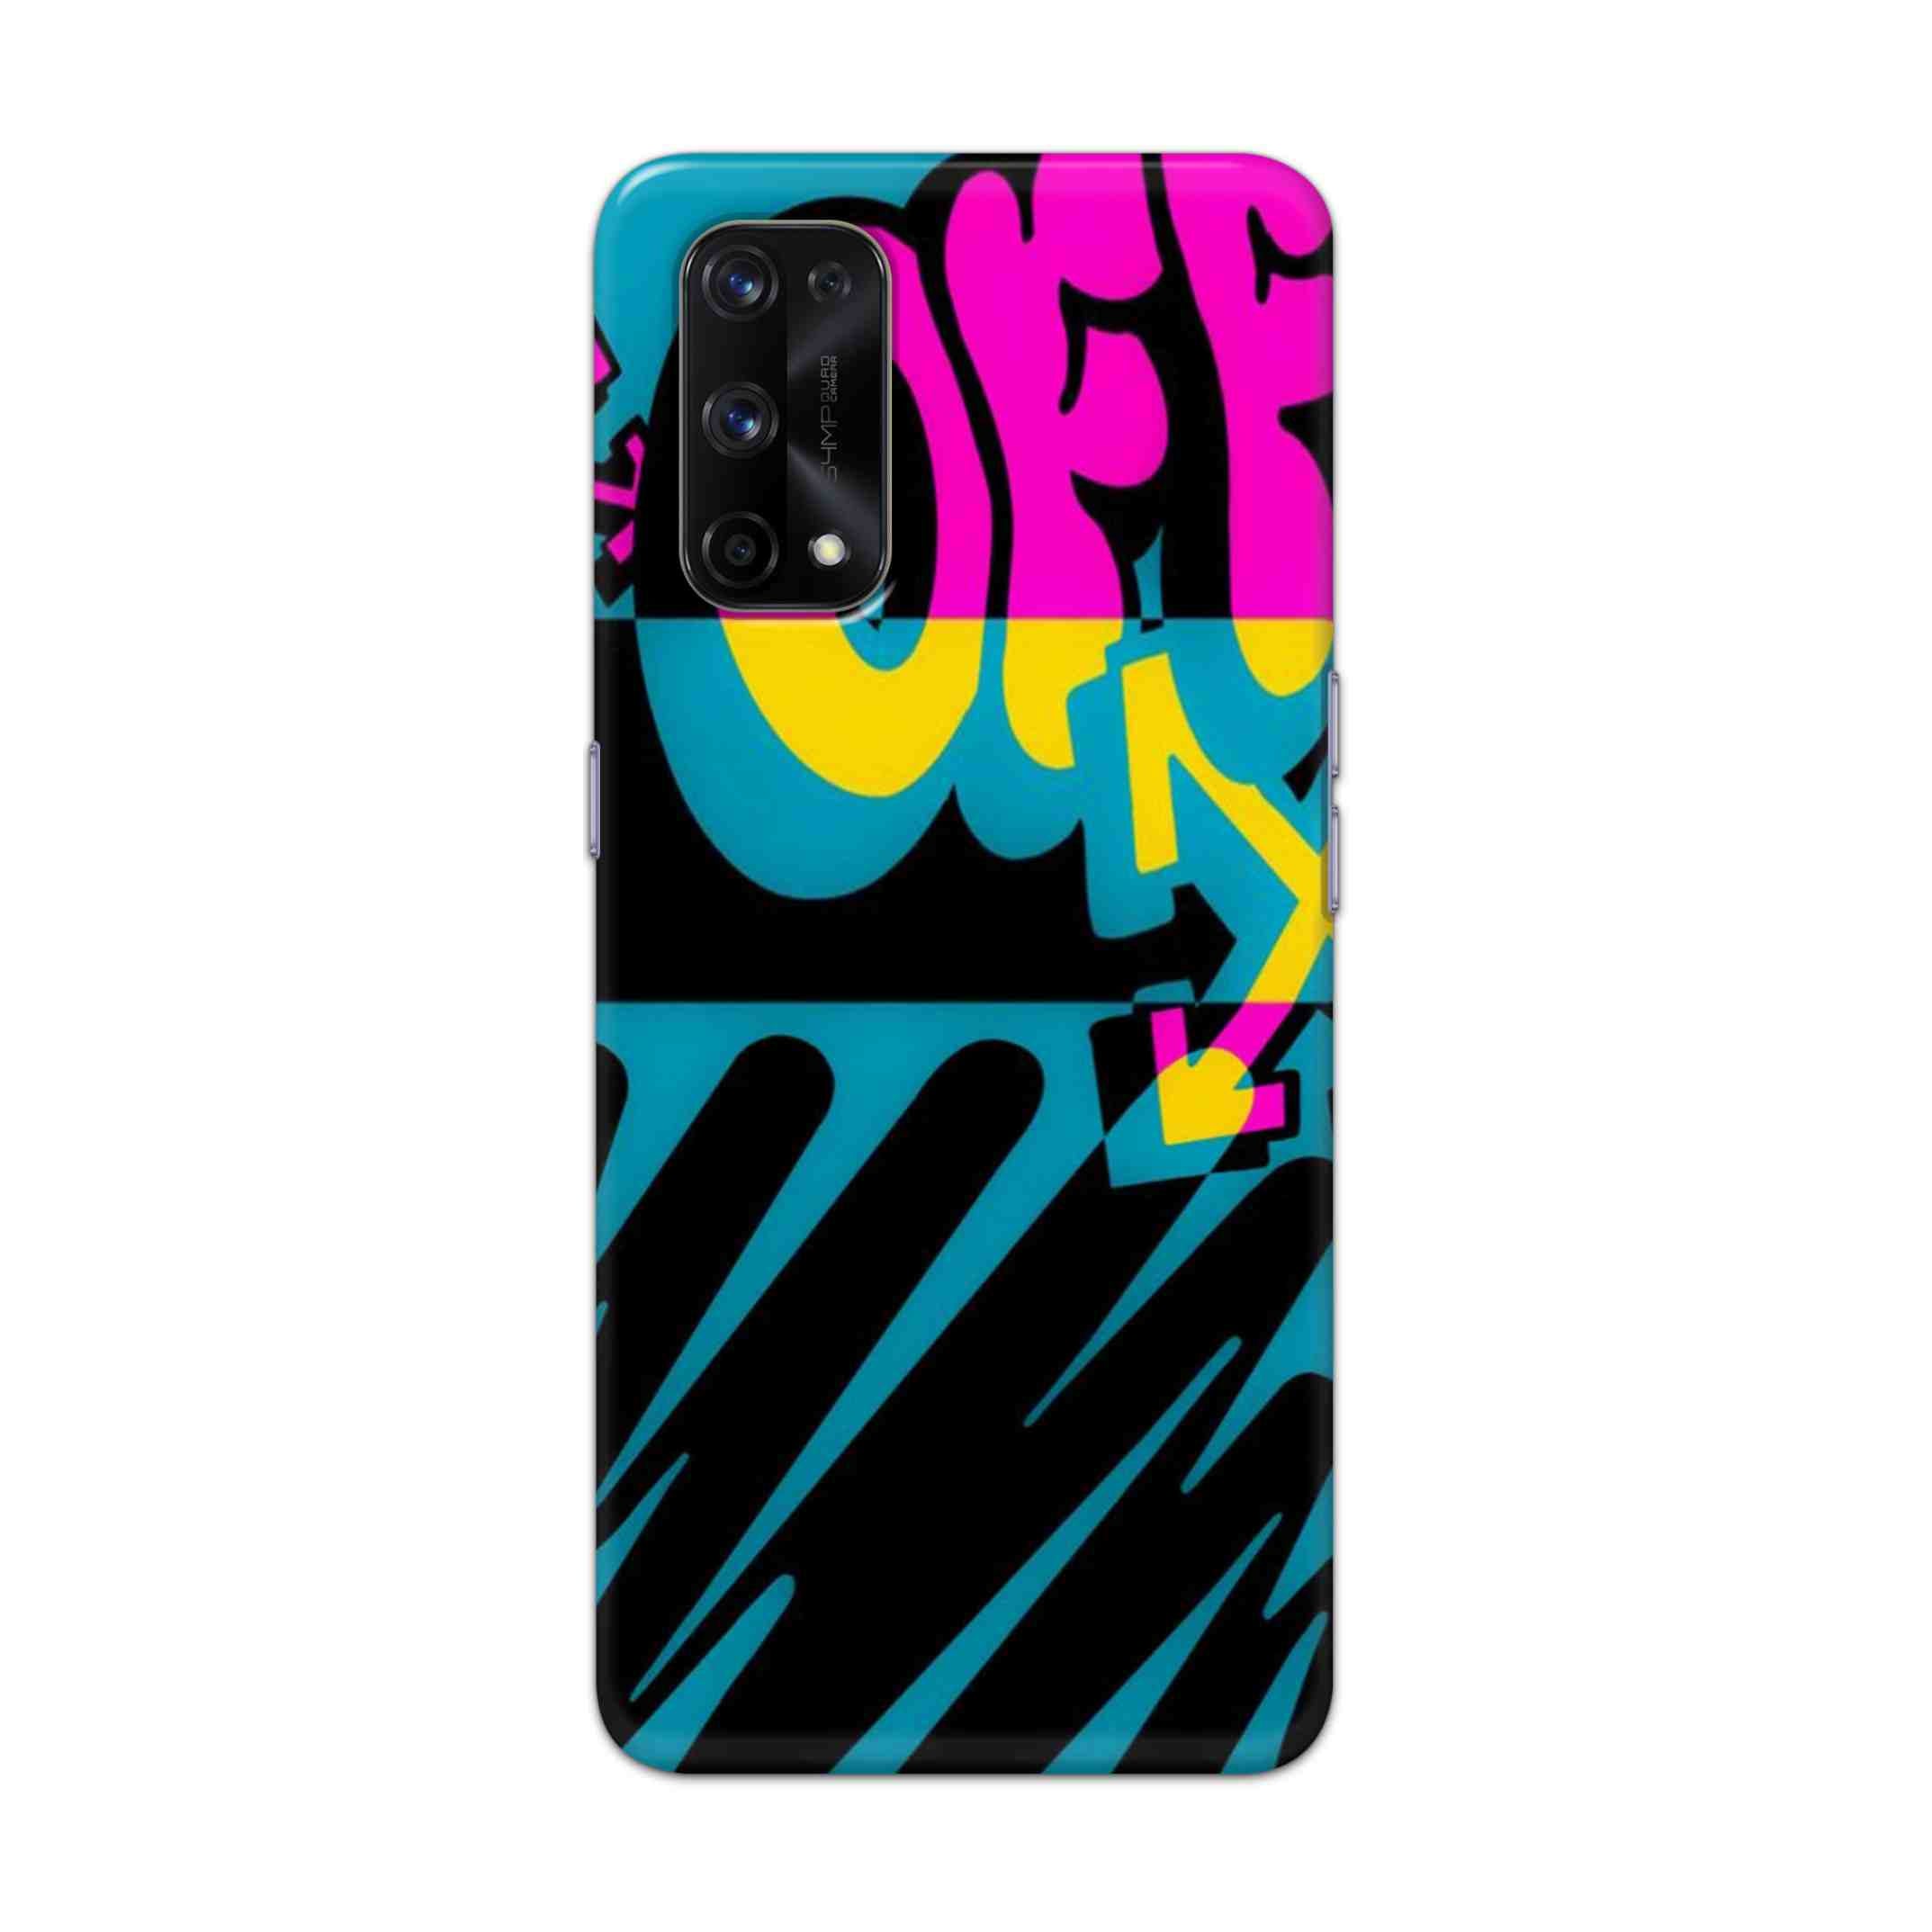 Buy Off Hard Back Mobile Phone Case Cover For Realme X7 Pro Online